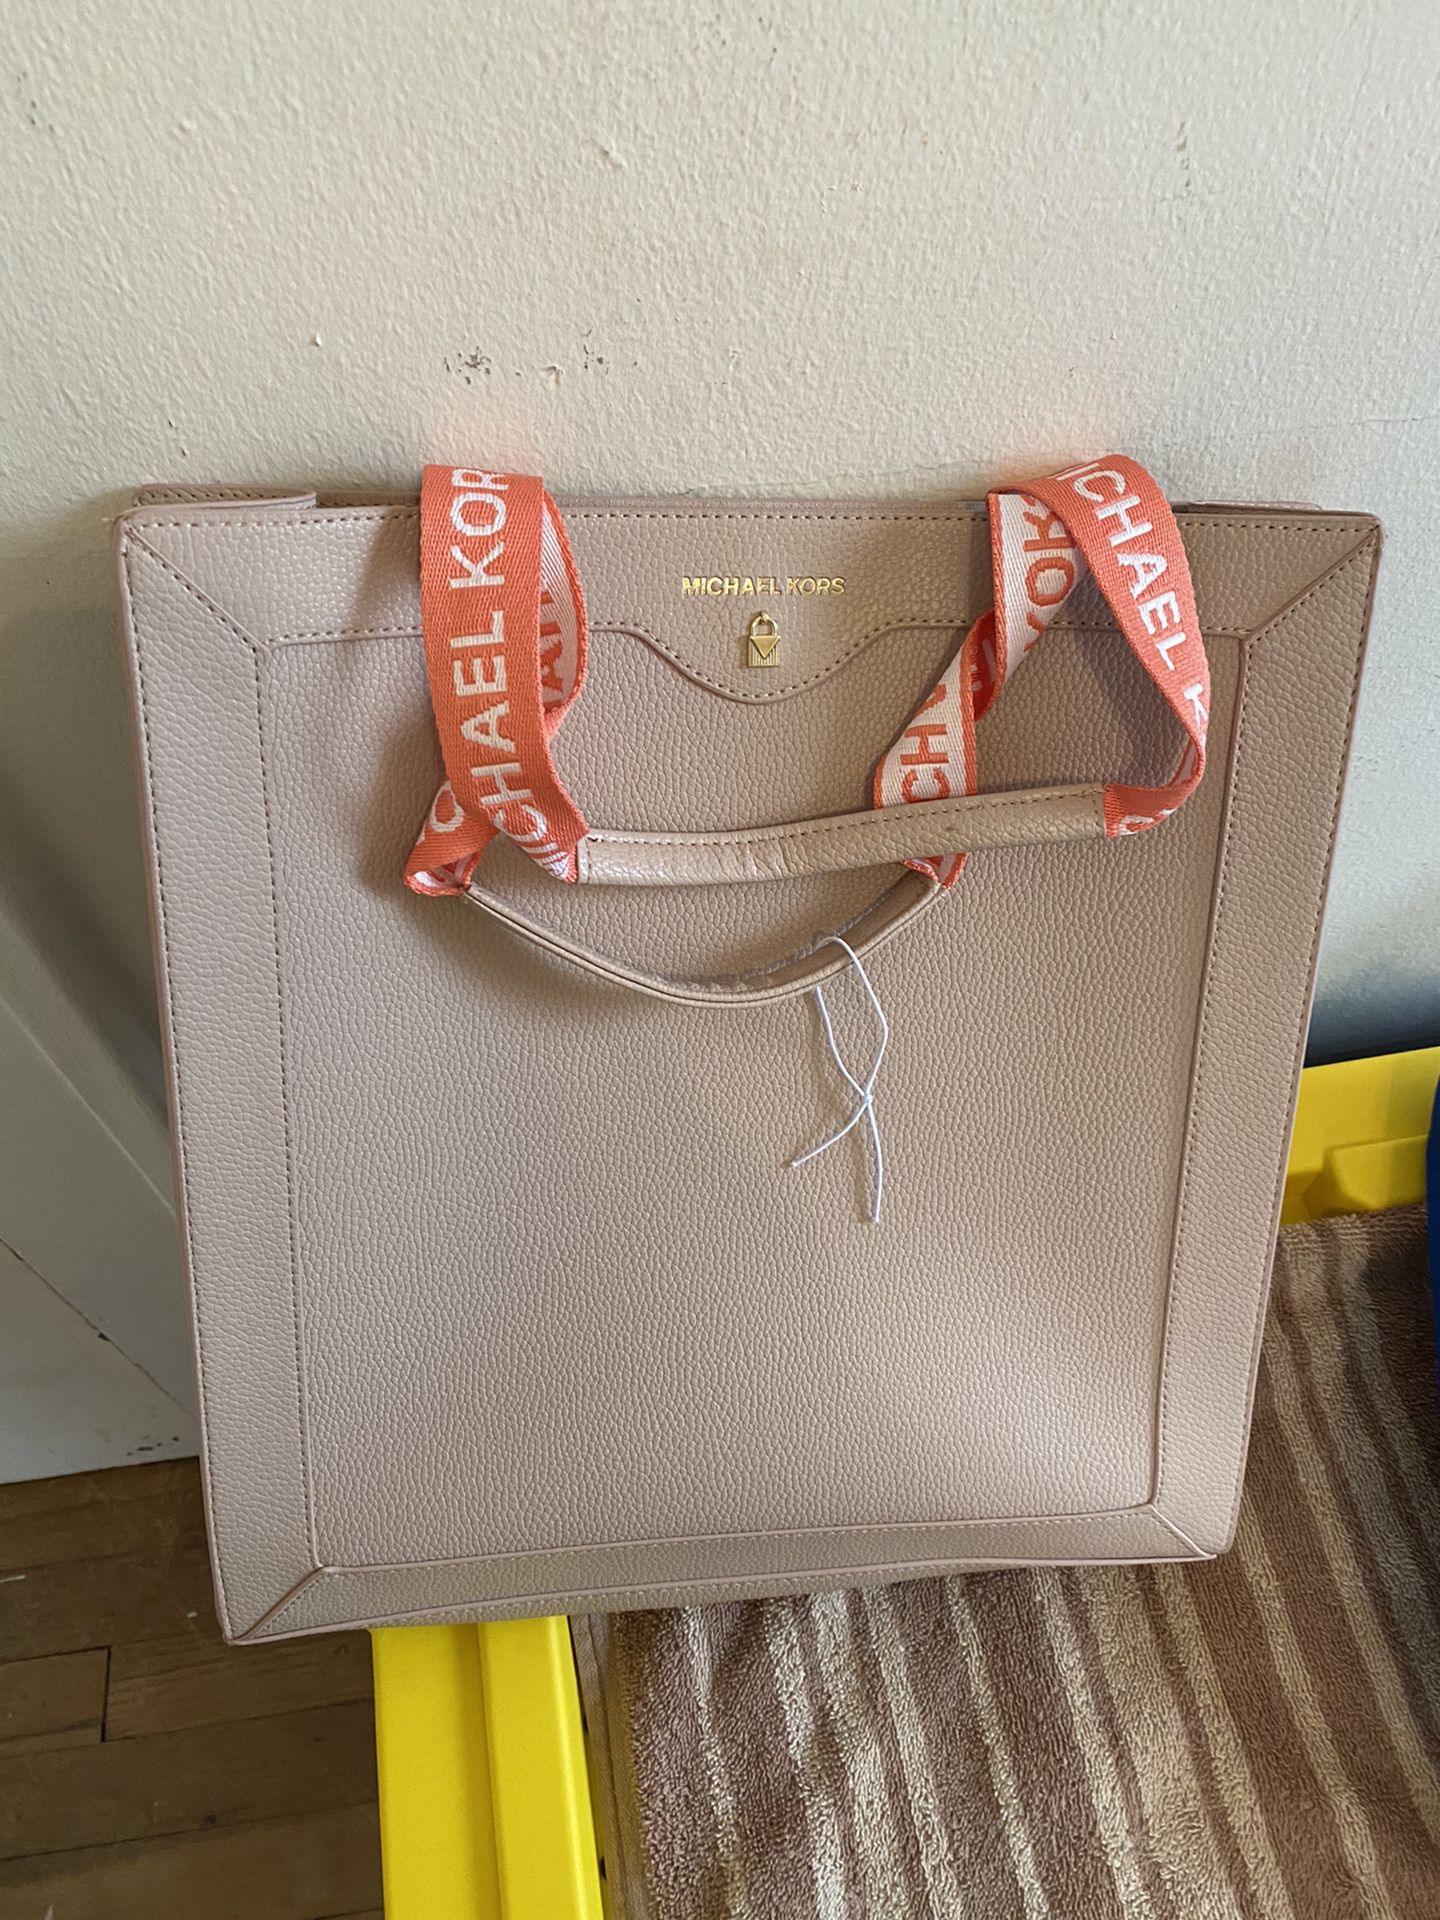 Brand new Michael Kors bag from Macy’s retail at $250